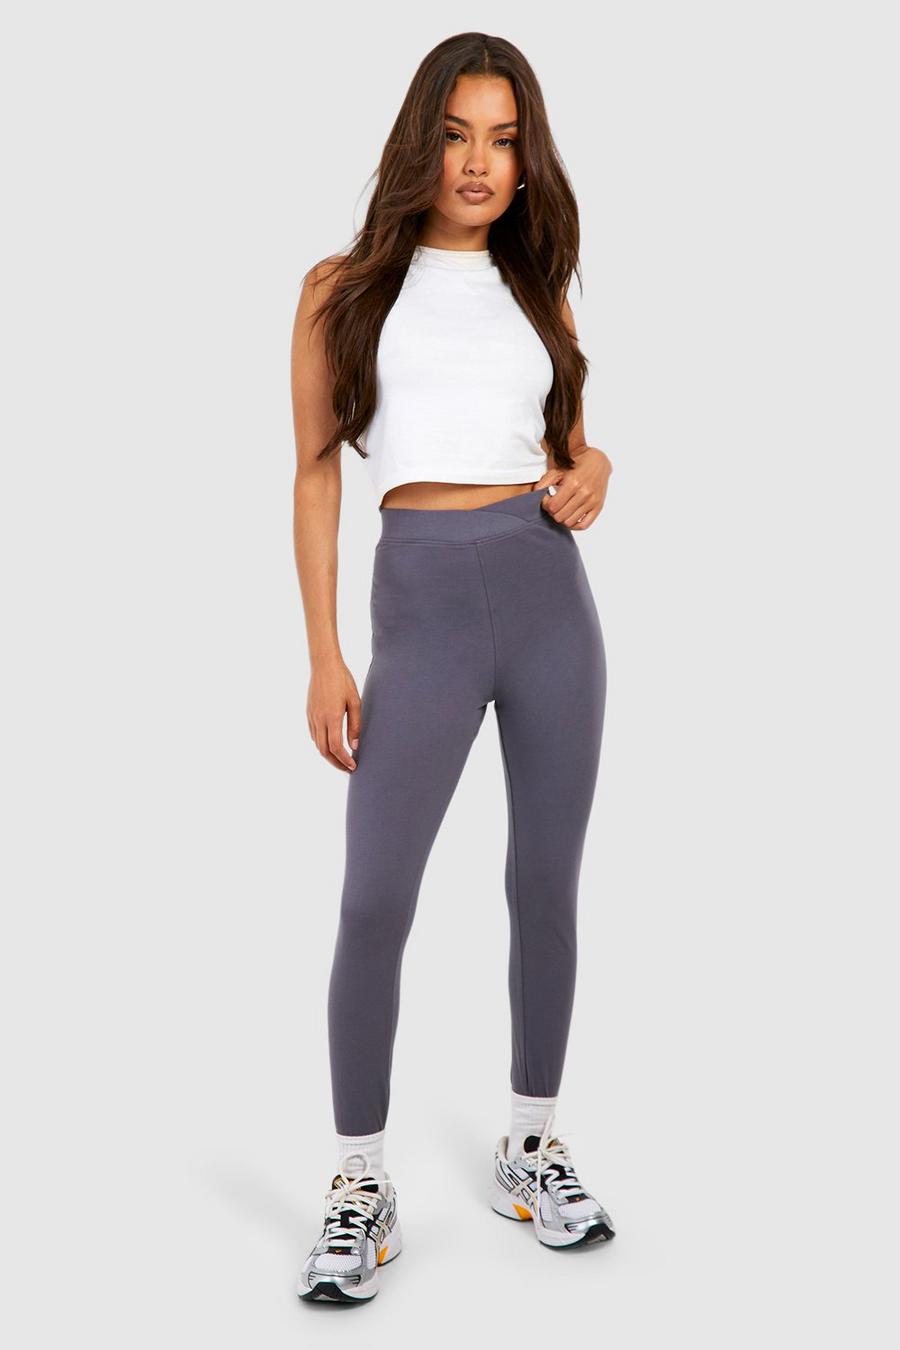 Charcoal grey Cotton Jersey Wrap High Waisted Leggings